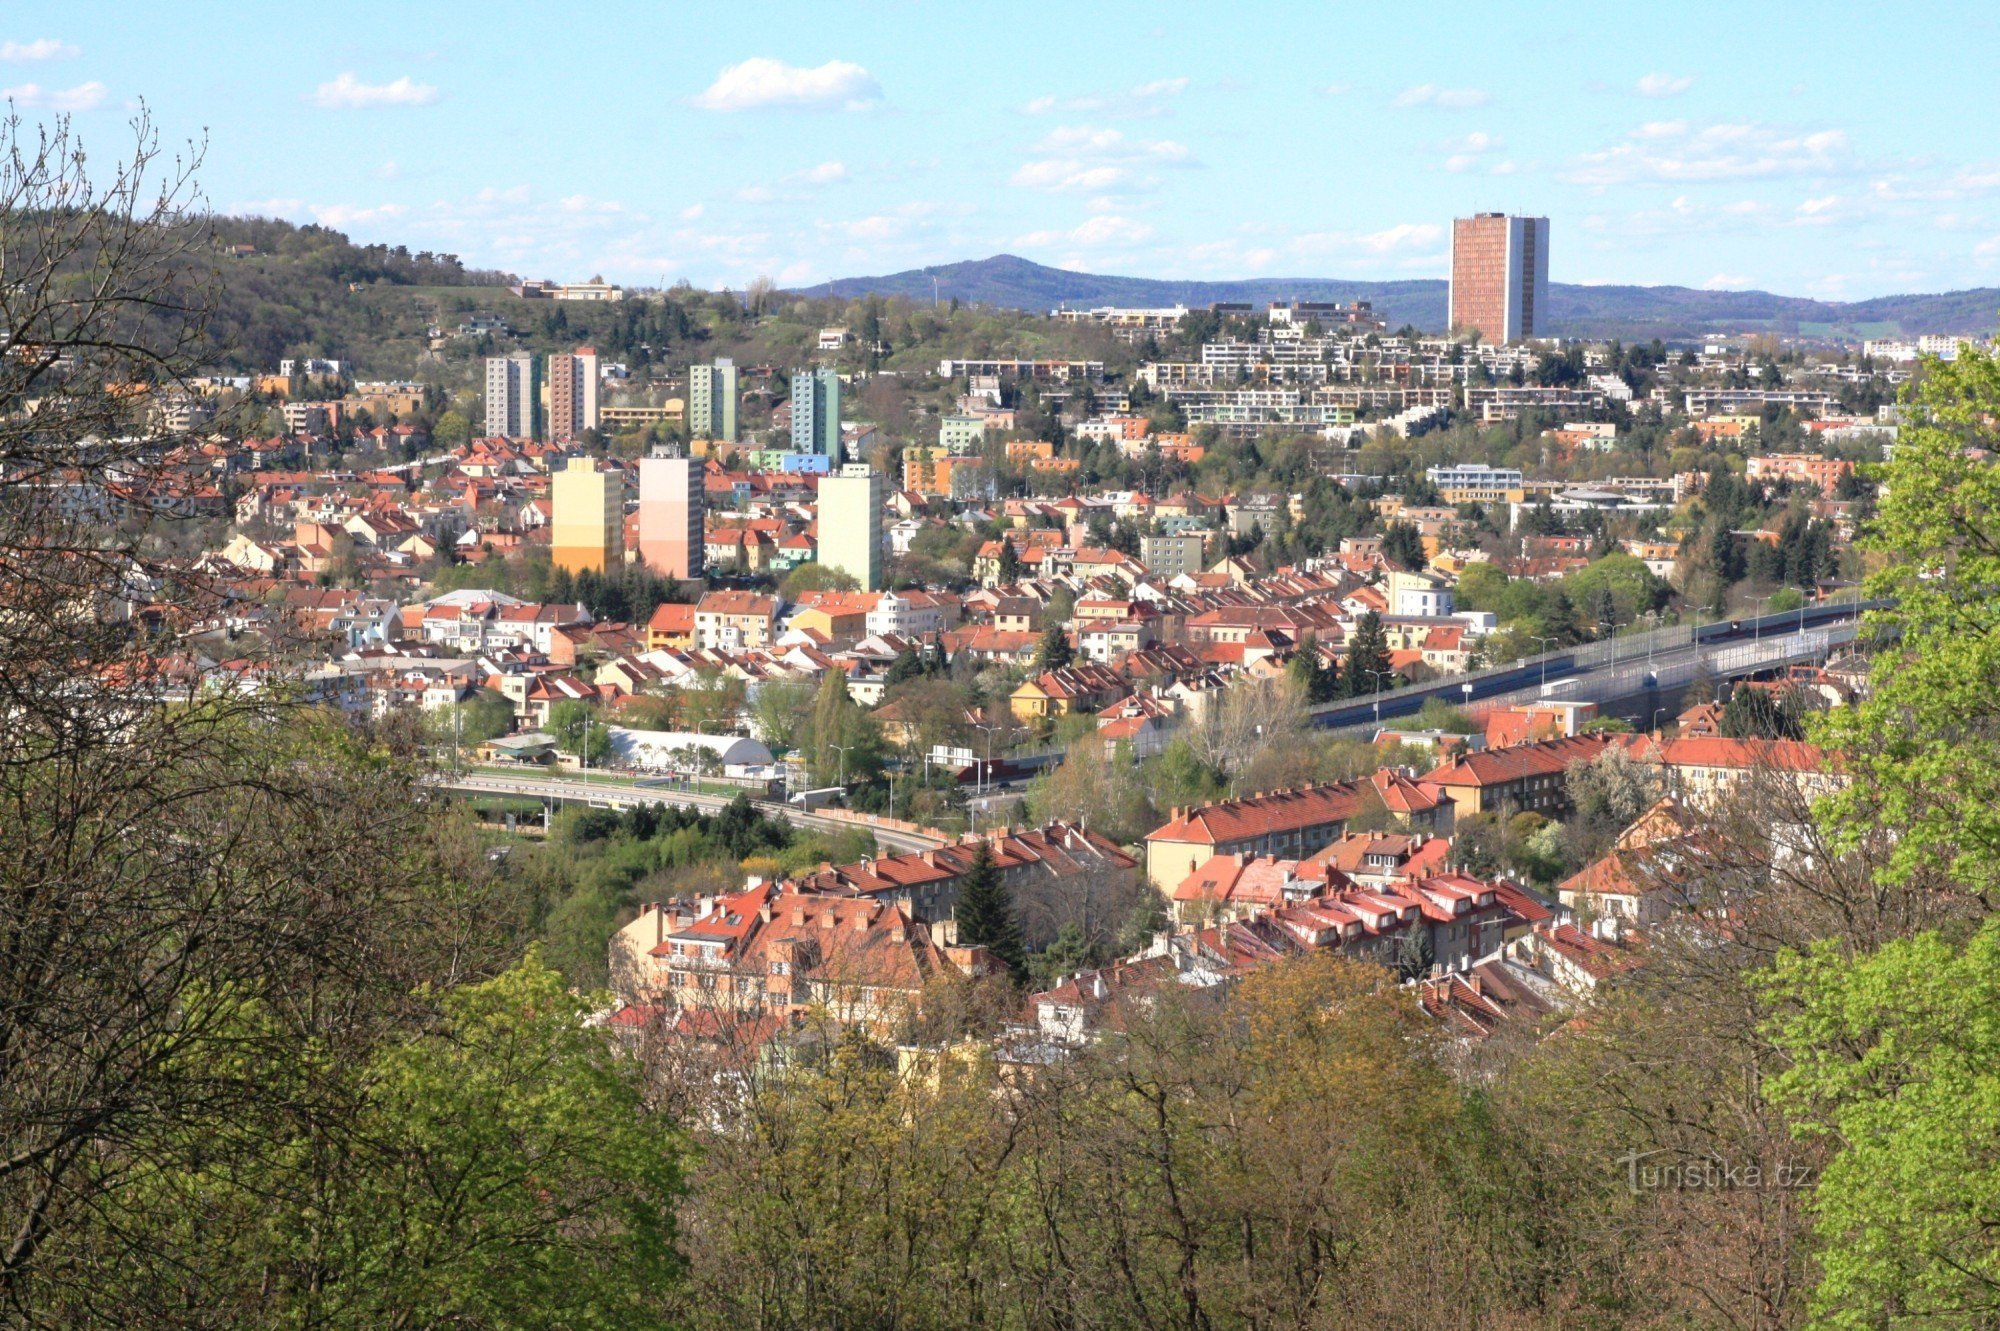 View from the viewpoint of the Žabovřesky and Komín district